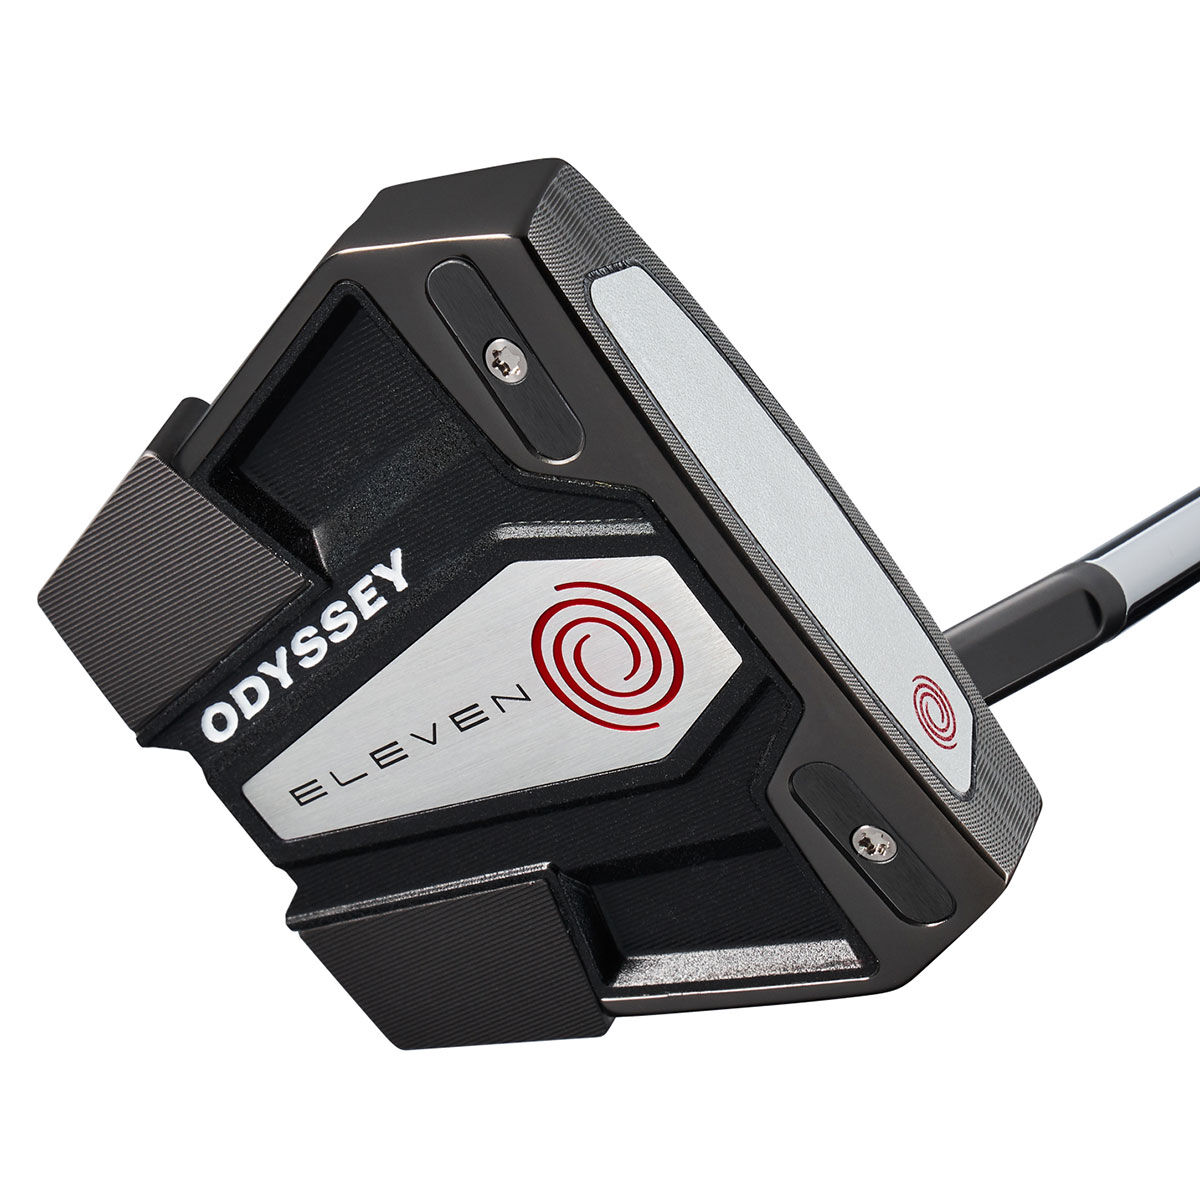 Odyssey Black and White Eleven S Right Hand Golf Putter, Size: 35" | American Golf, 35 Inches